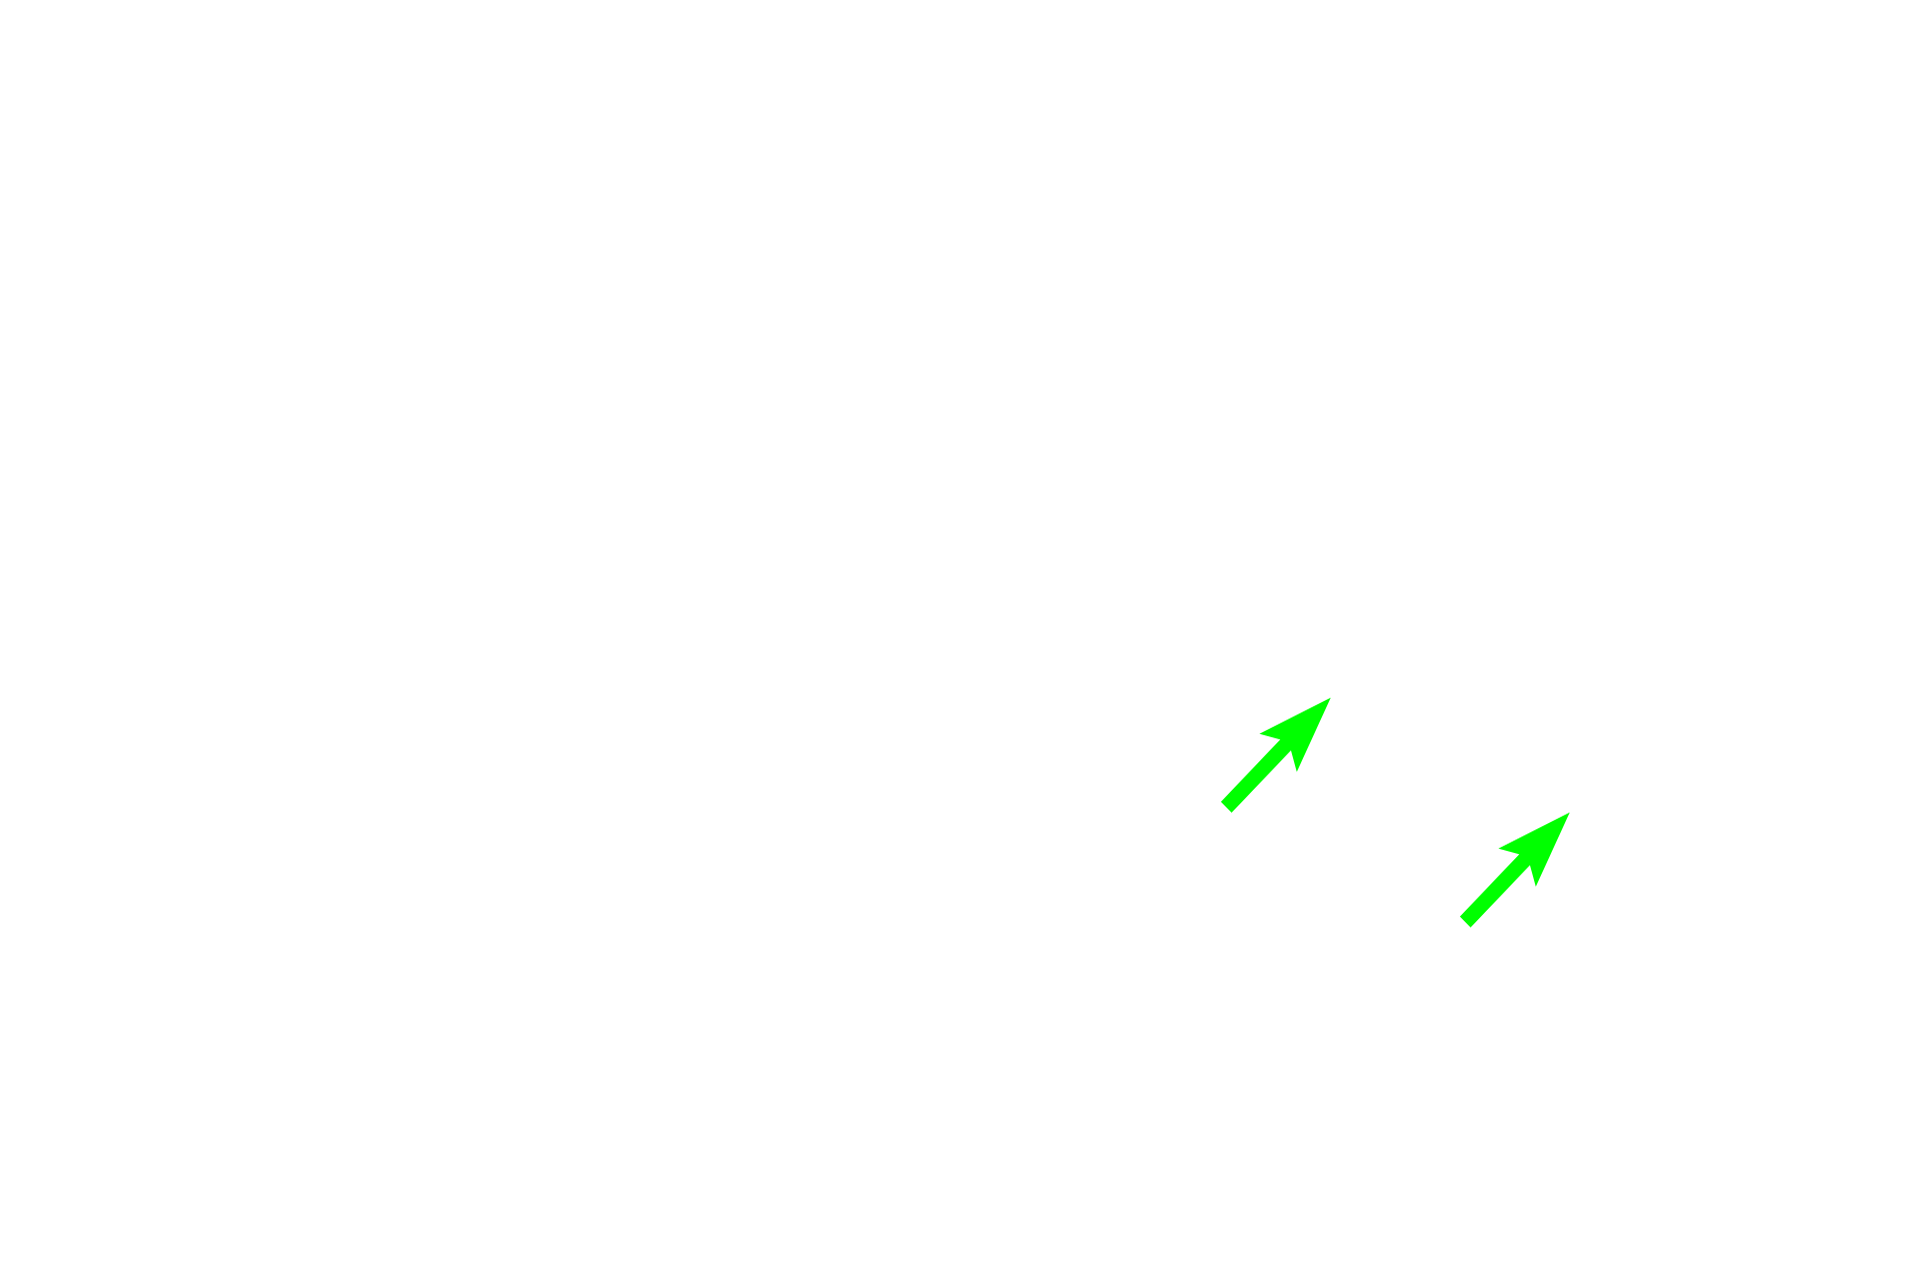  - Nuclei <p>Tubules, as the name indicates, are linear secretory units lined by cuboidal to columnar cells.  A number of tubules in longitudinal and cross section are visible in the image.  Most tubules secrete mucus and the apical region appears frothy or clear because the mucus is easily extracted during tissue processing.  The nuclei are basally located and compressed by the mass of mucus above them.  Tubules have a wide lumen to accommodate the thick, mucus secretion.</p>
